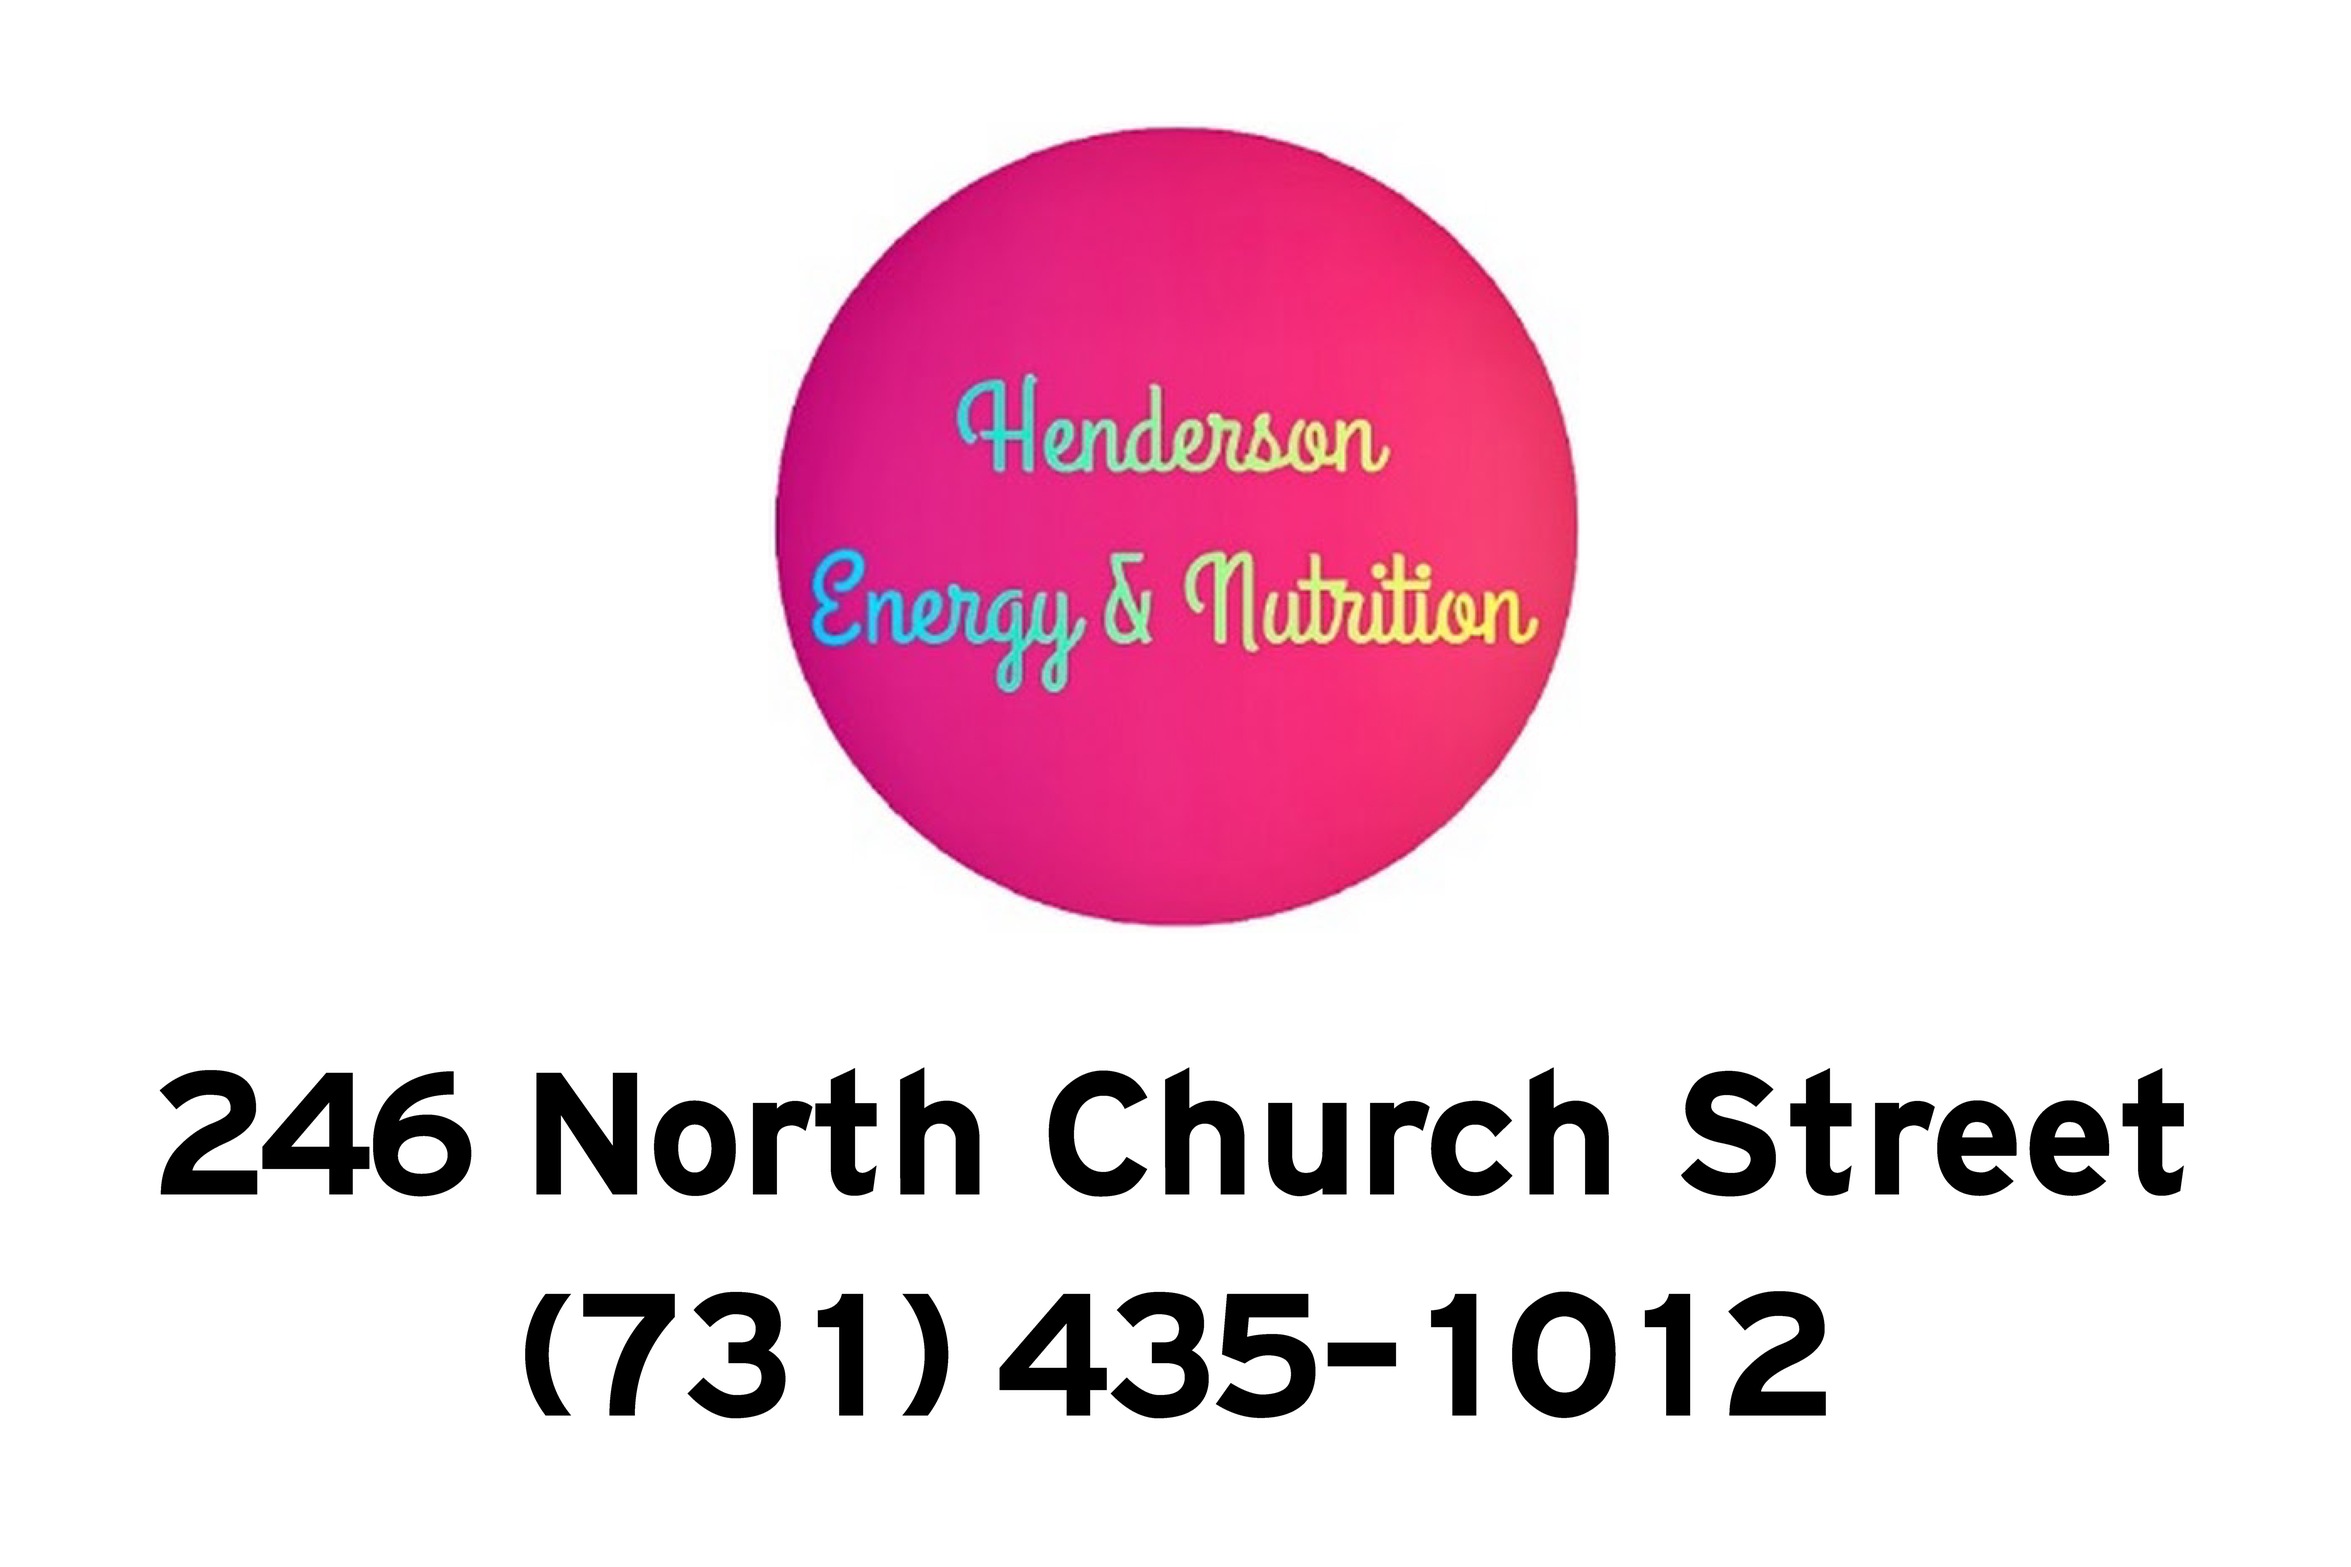 Henderson Energy and Nutrition